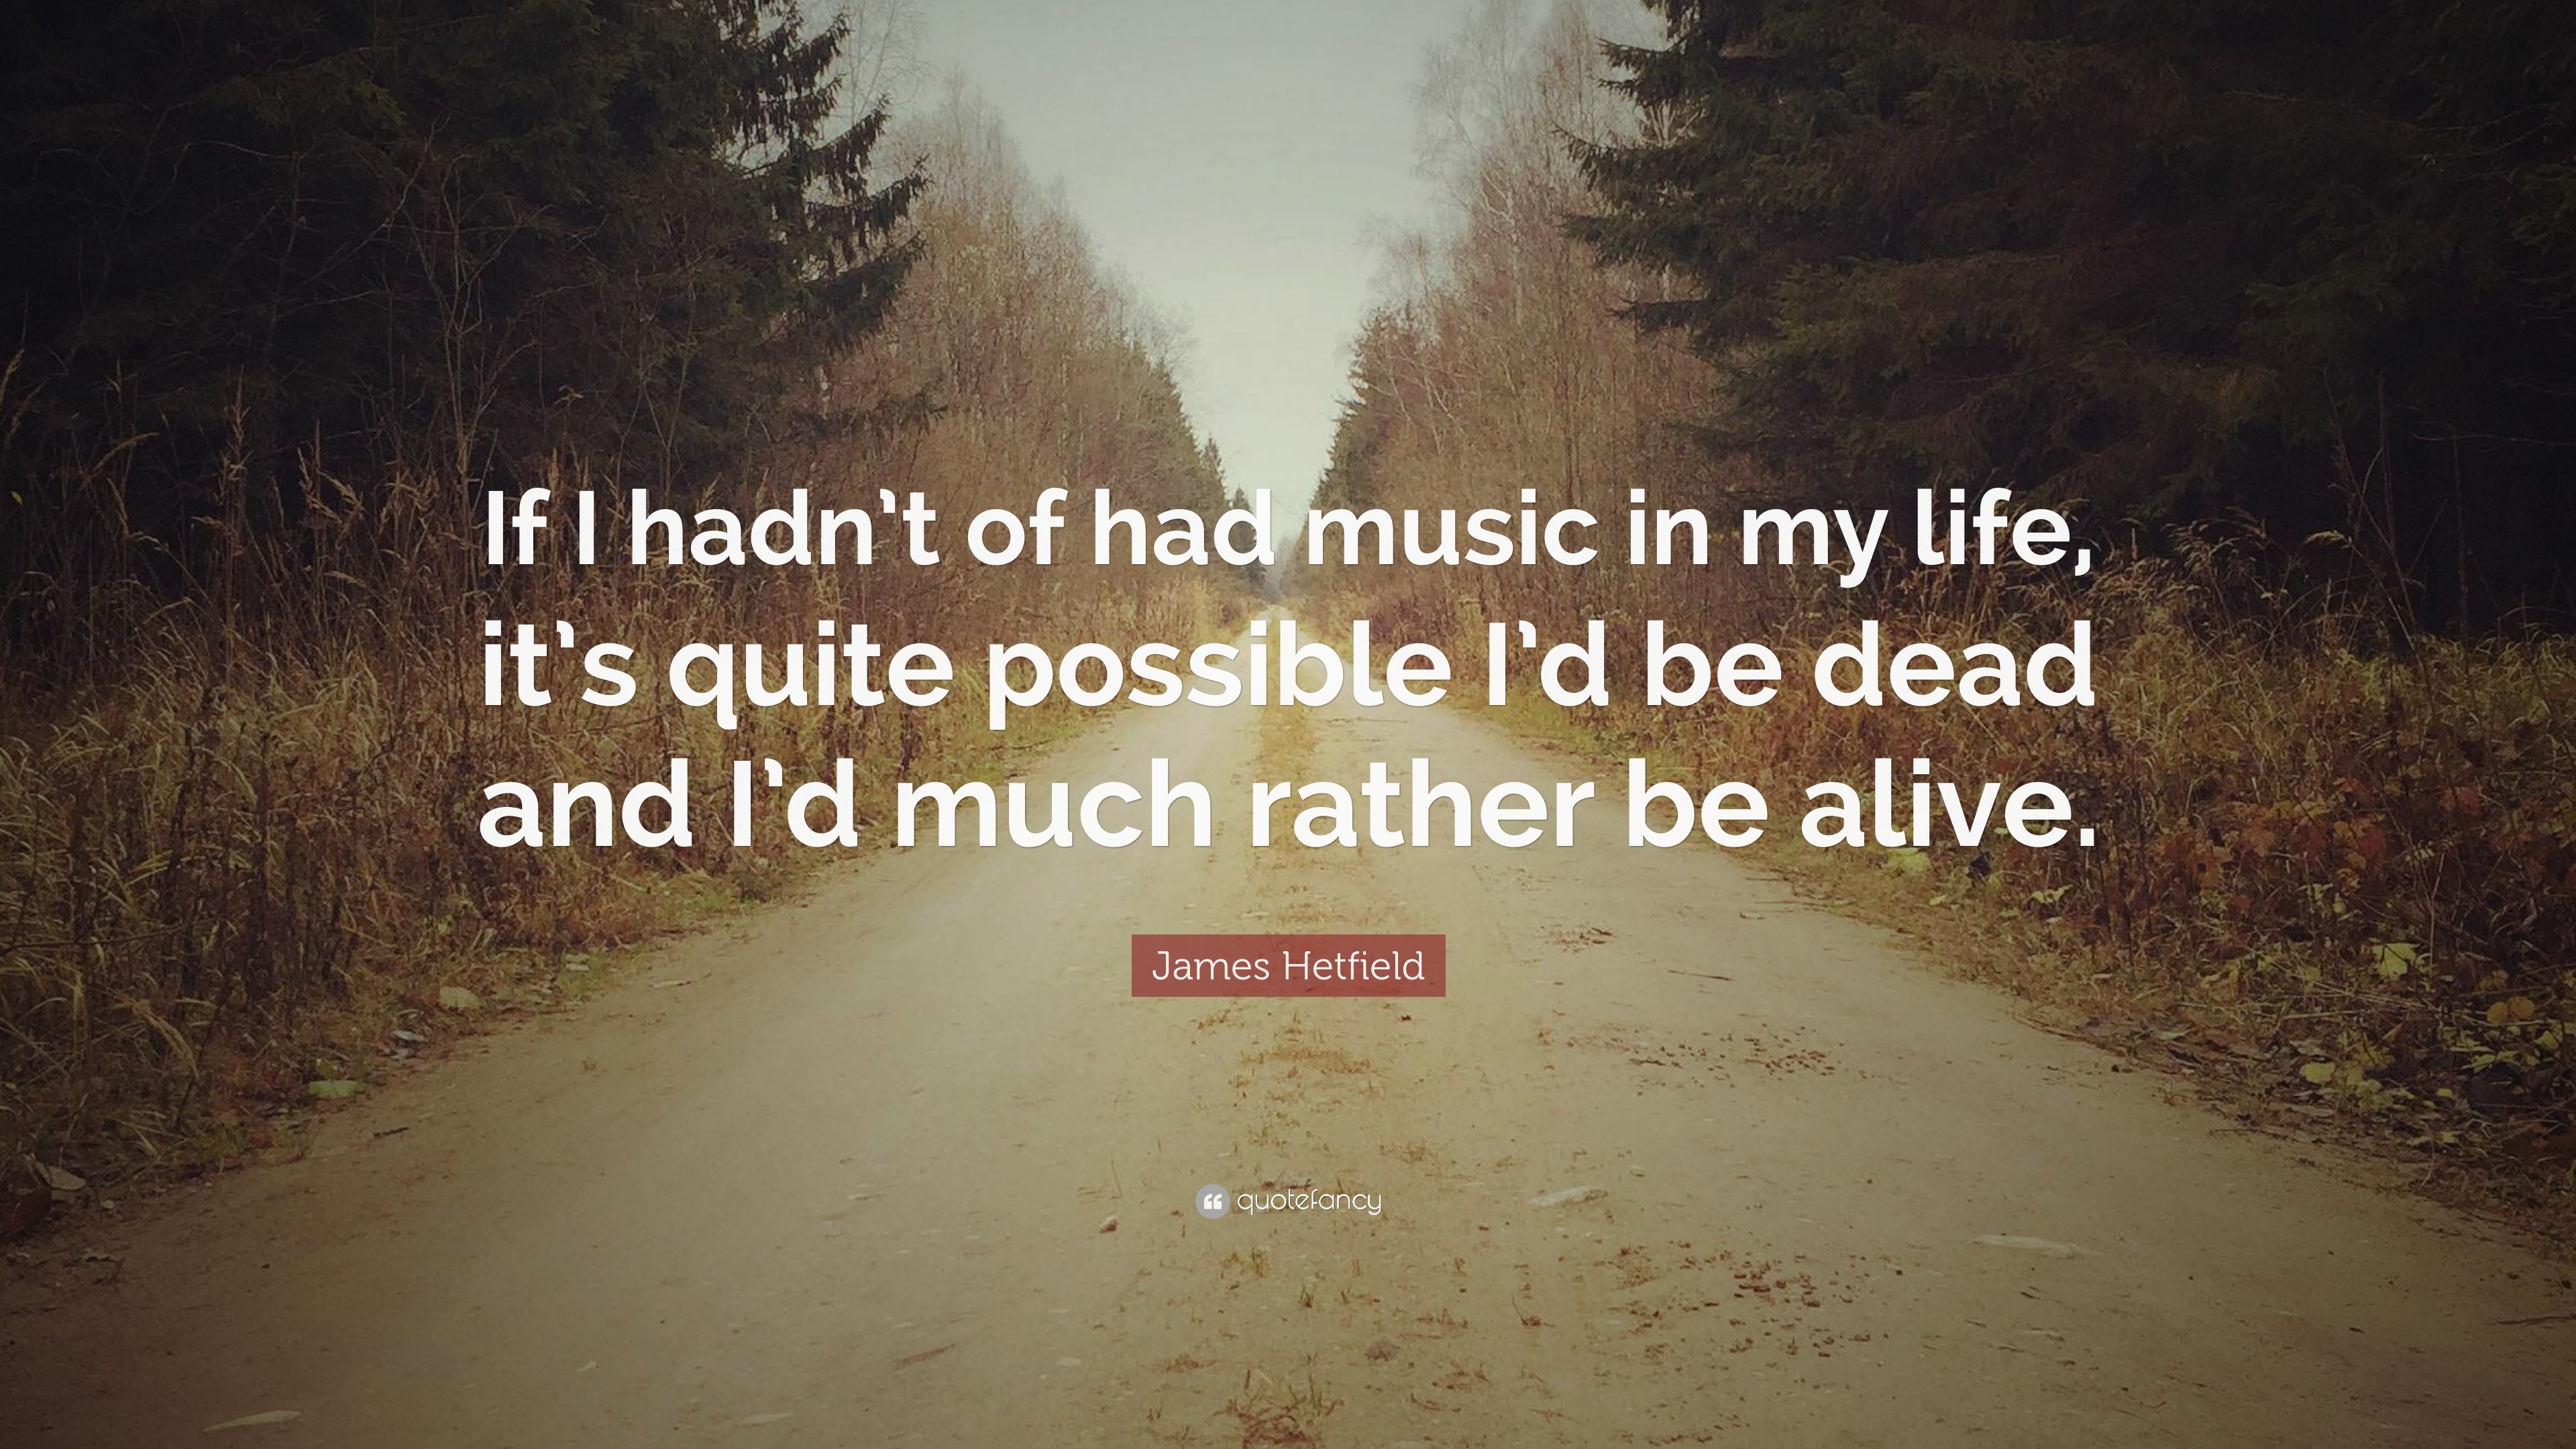 3840x2160 James Hetfield Quote: “If I hadn't of had music in my life